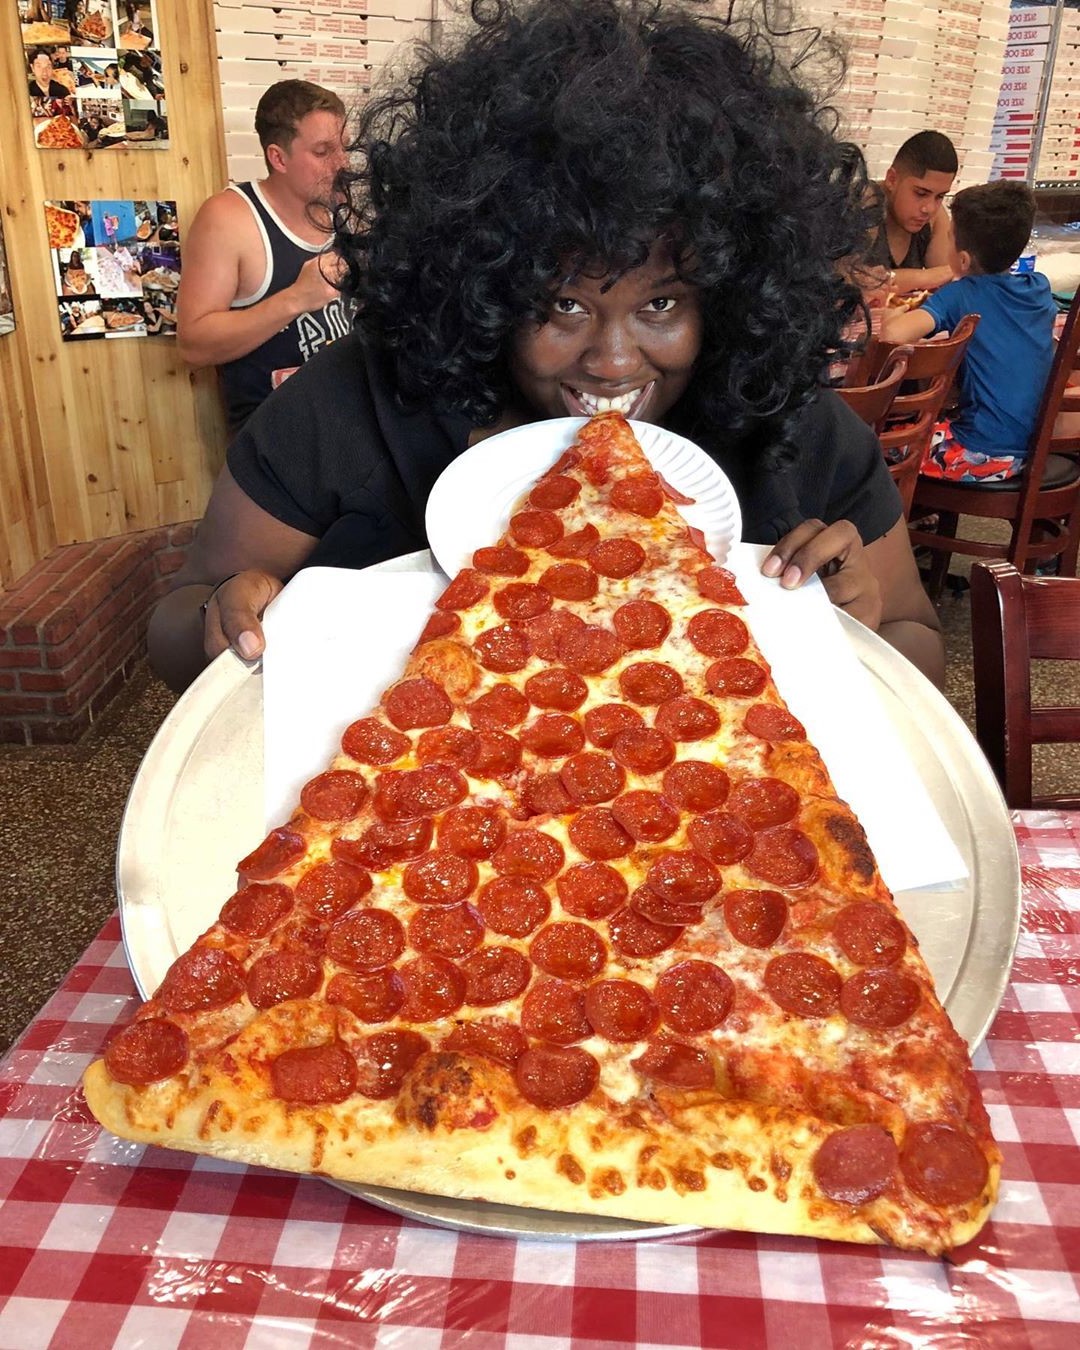 XXL pizza slices | New Foodie Trend Is A Giant Pizza Slice – The Biggest You've Seen | Her Beauty